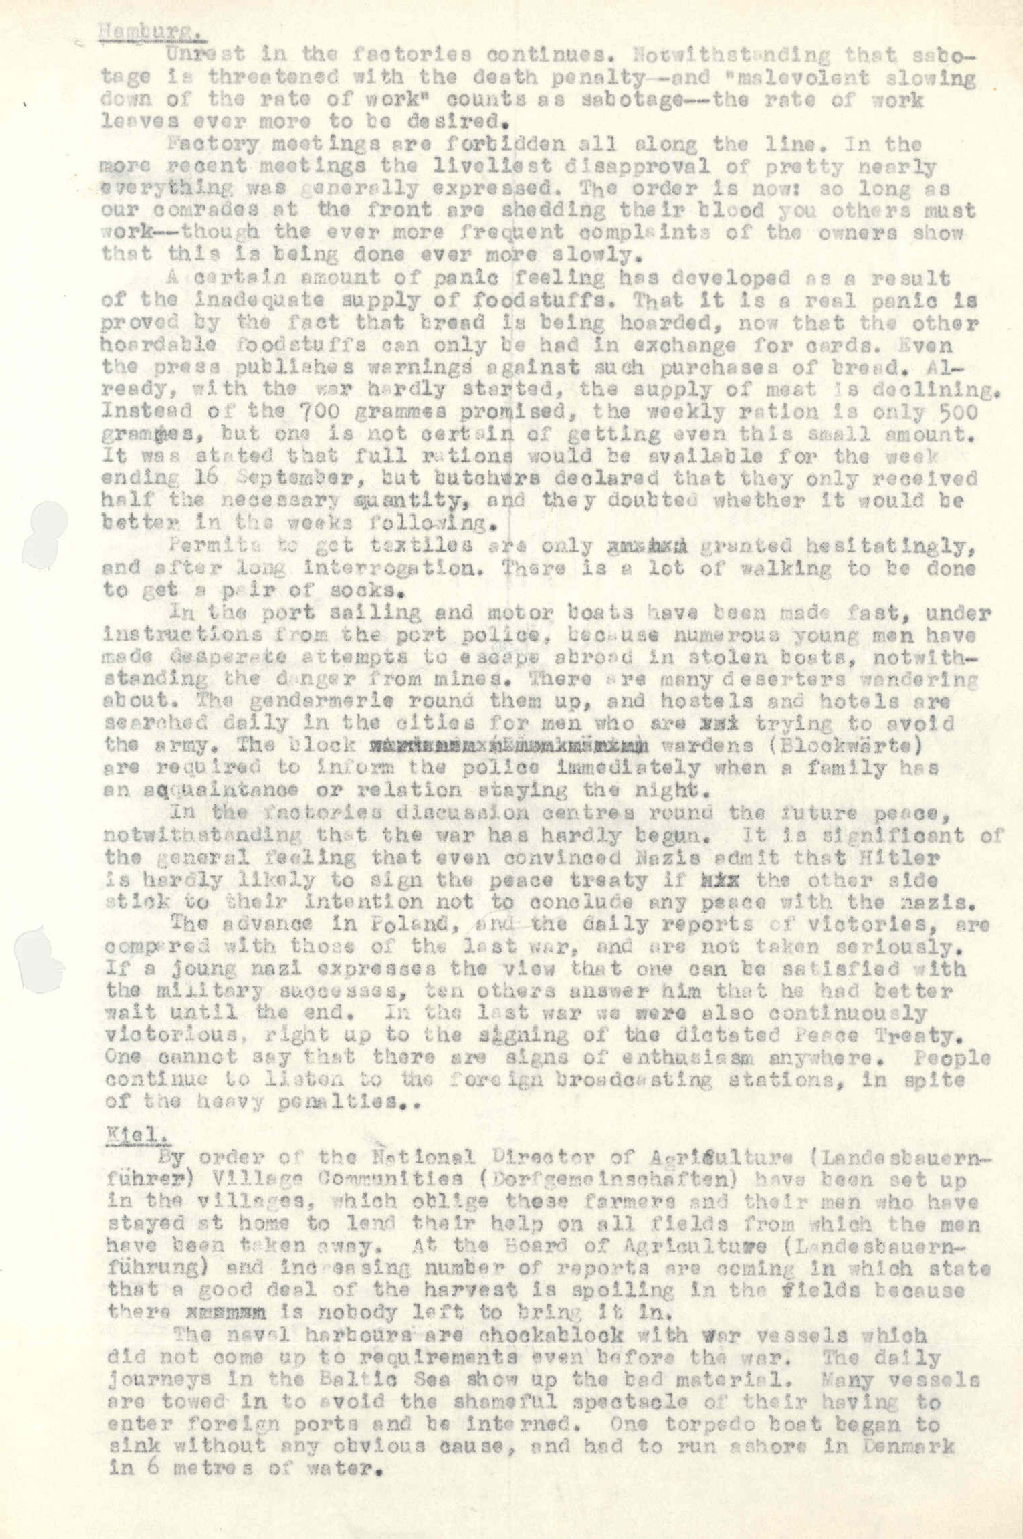 Reports on the situations in Hamburg and Berlin, September 1939